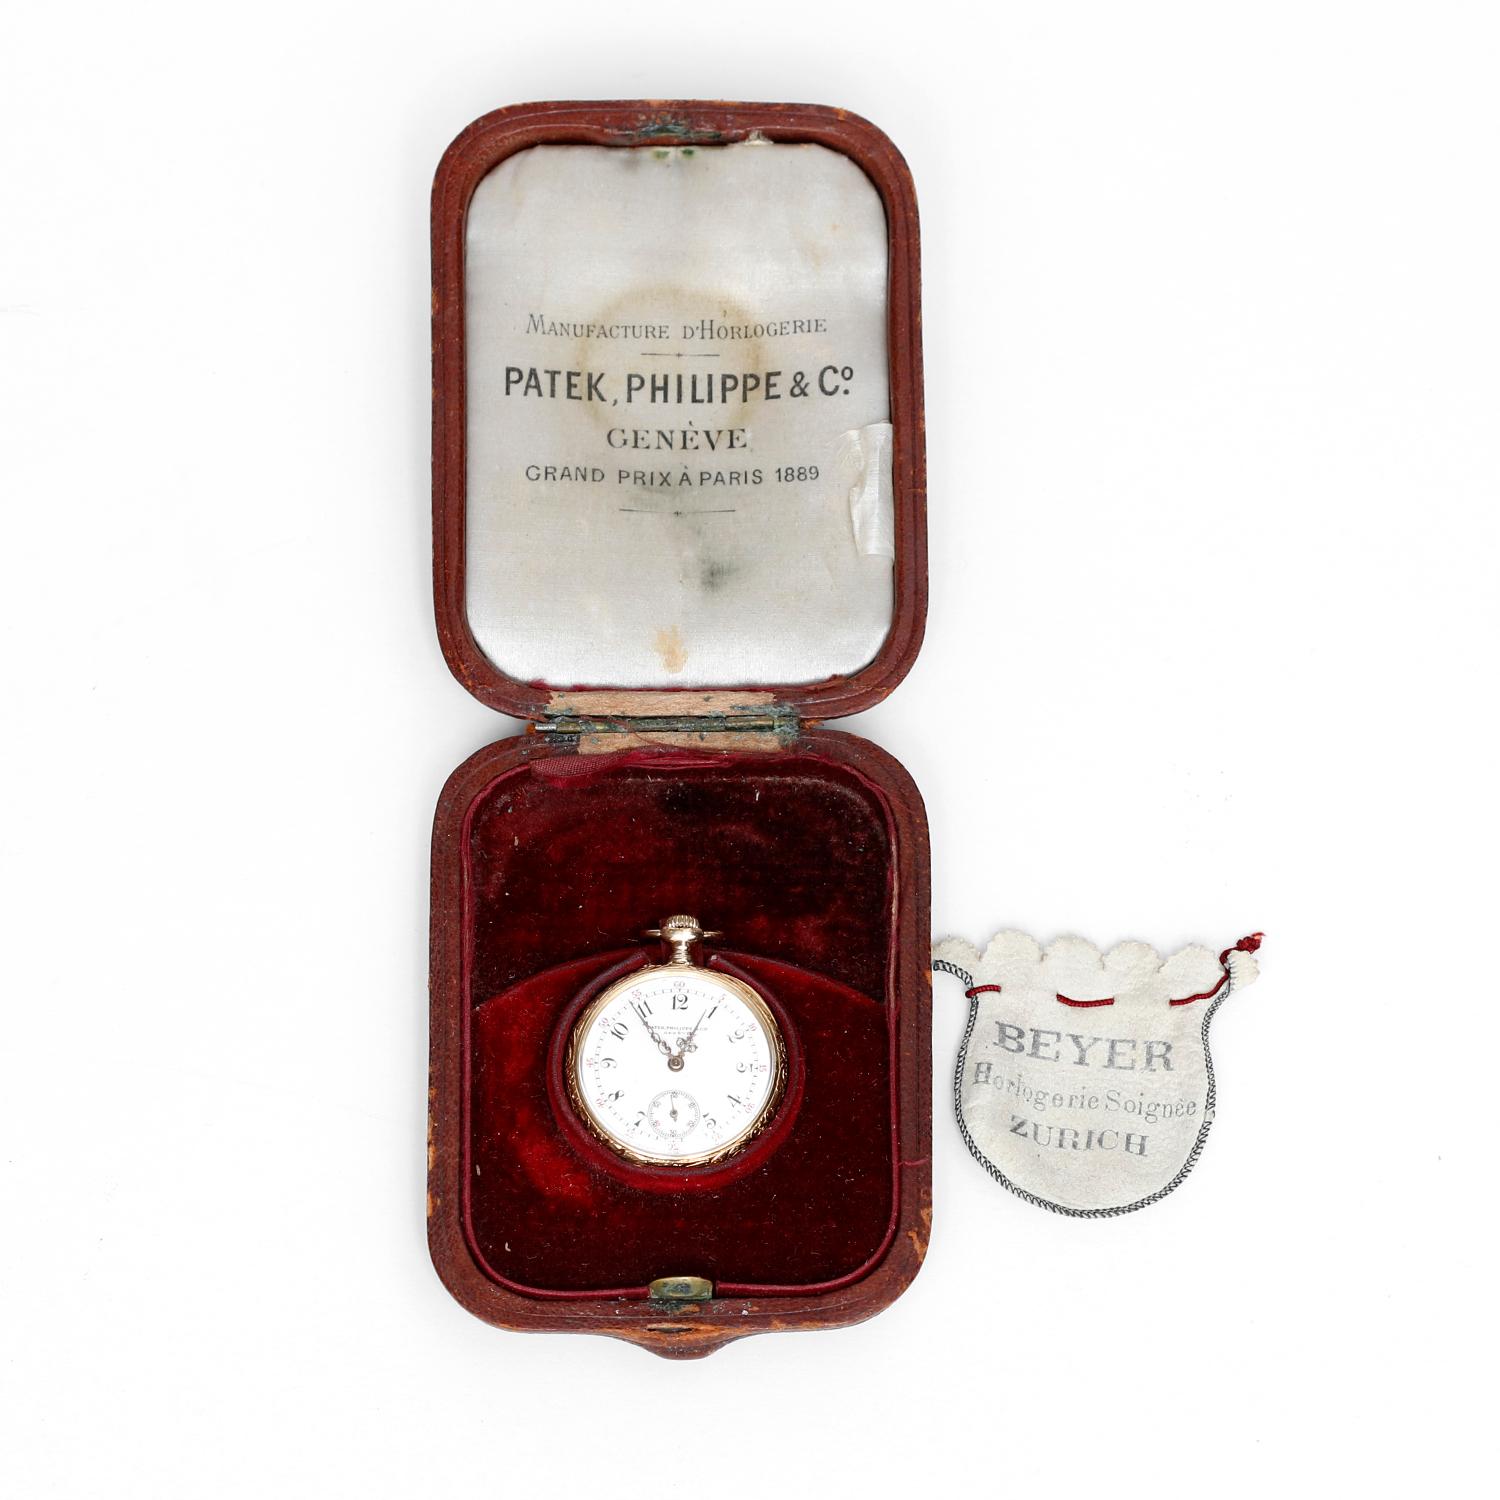 Patek Philippe & Co. Lady's Pocket Watch - Manual movement; 15 jewels. 18k Yellow gold ( 32 mm ) with gold cuvette, swirl leaf and scallops, back with ornate overlay monogram. Enamel dial with radial arabic numerals and red five minute, gold Louis